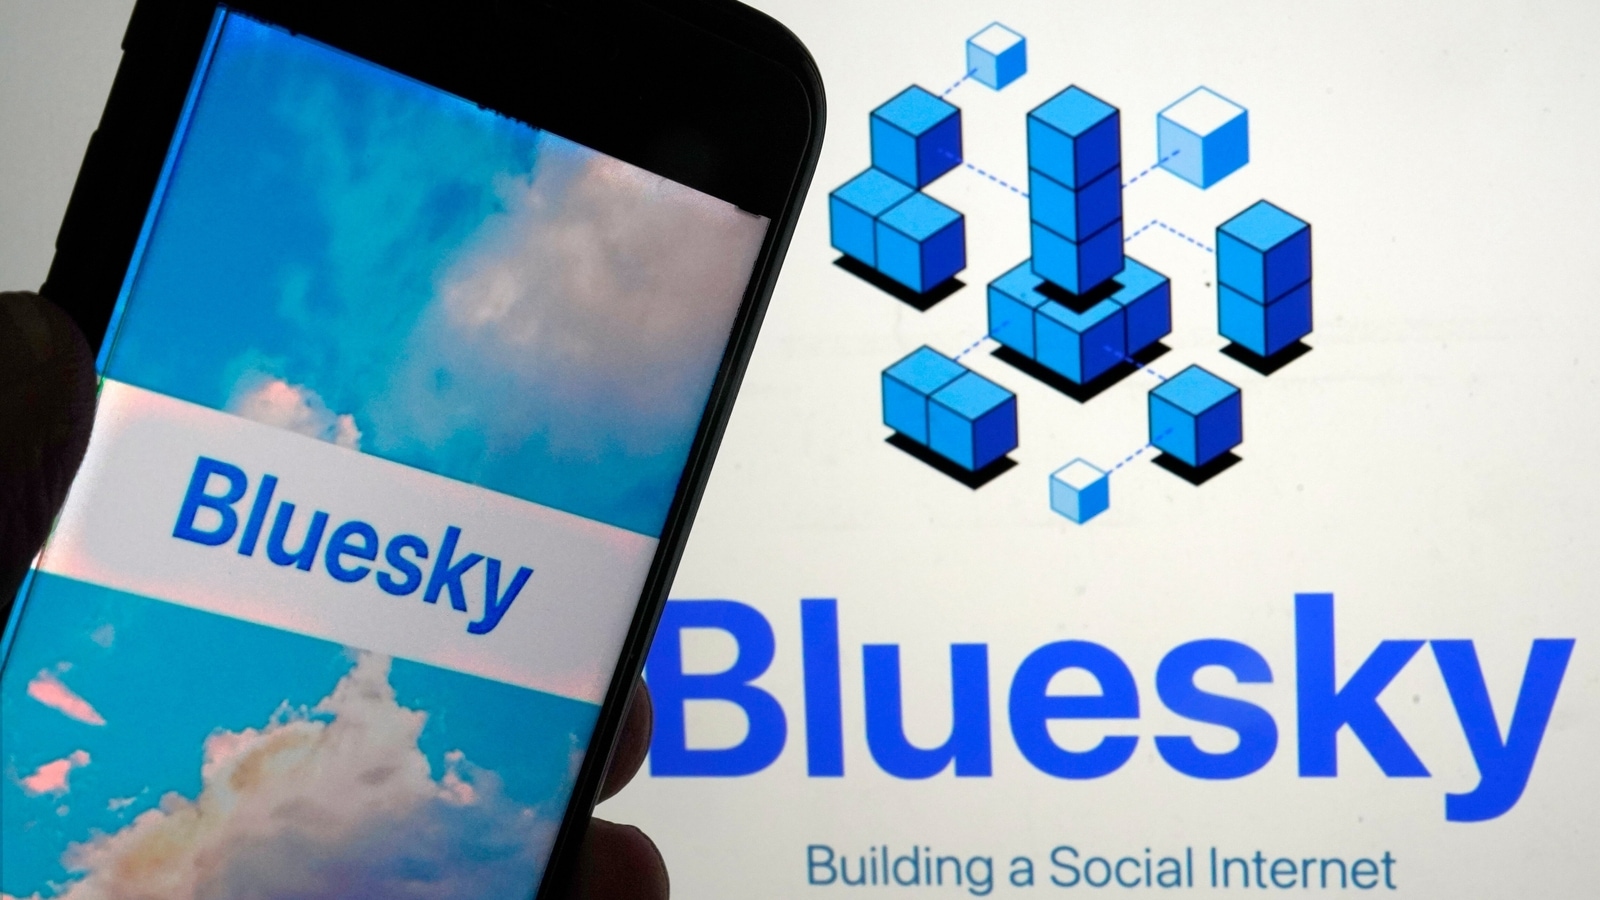 Bluesky crosses 1 mn users milestone even as Threads declines